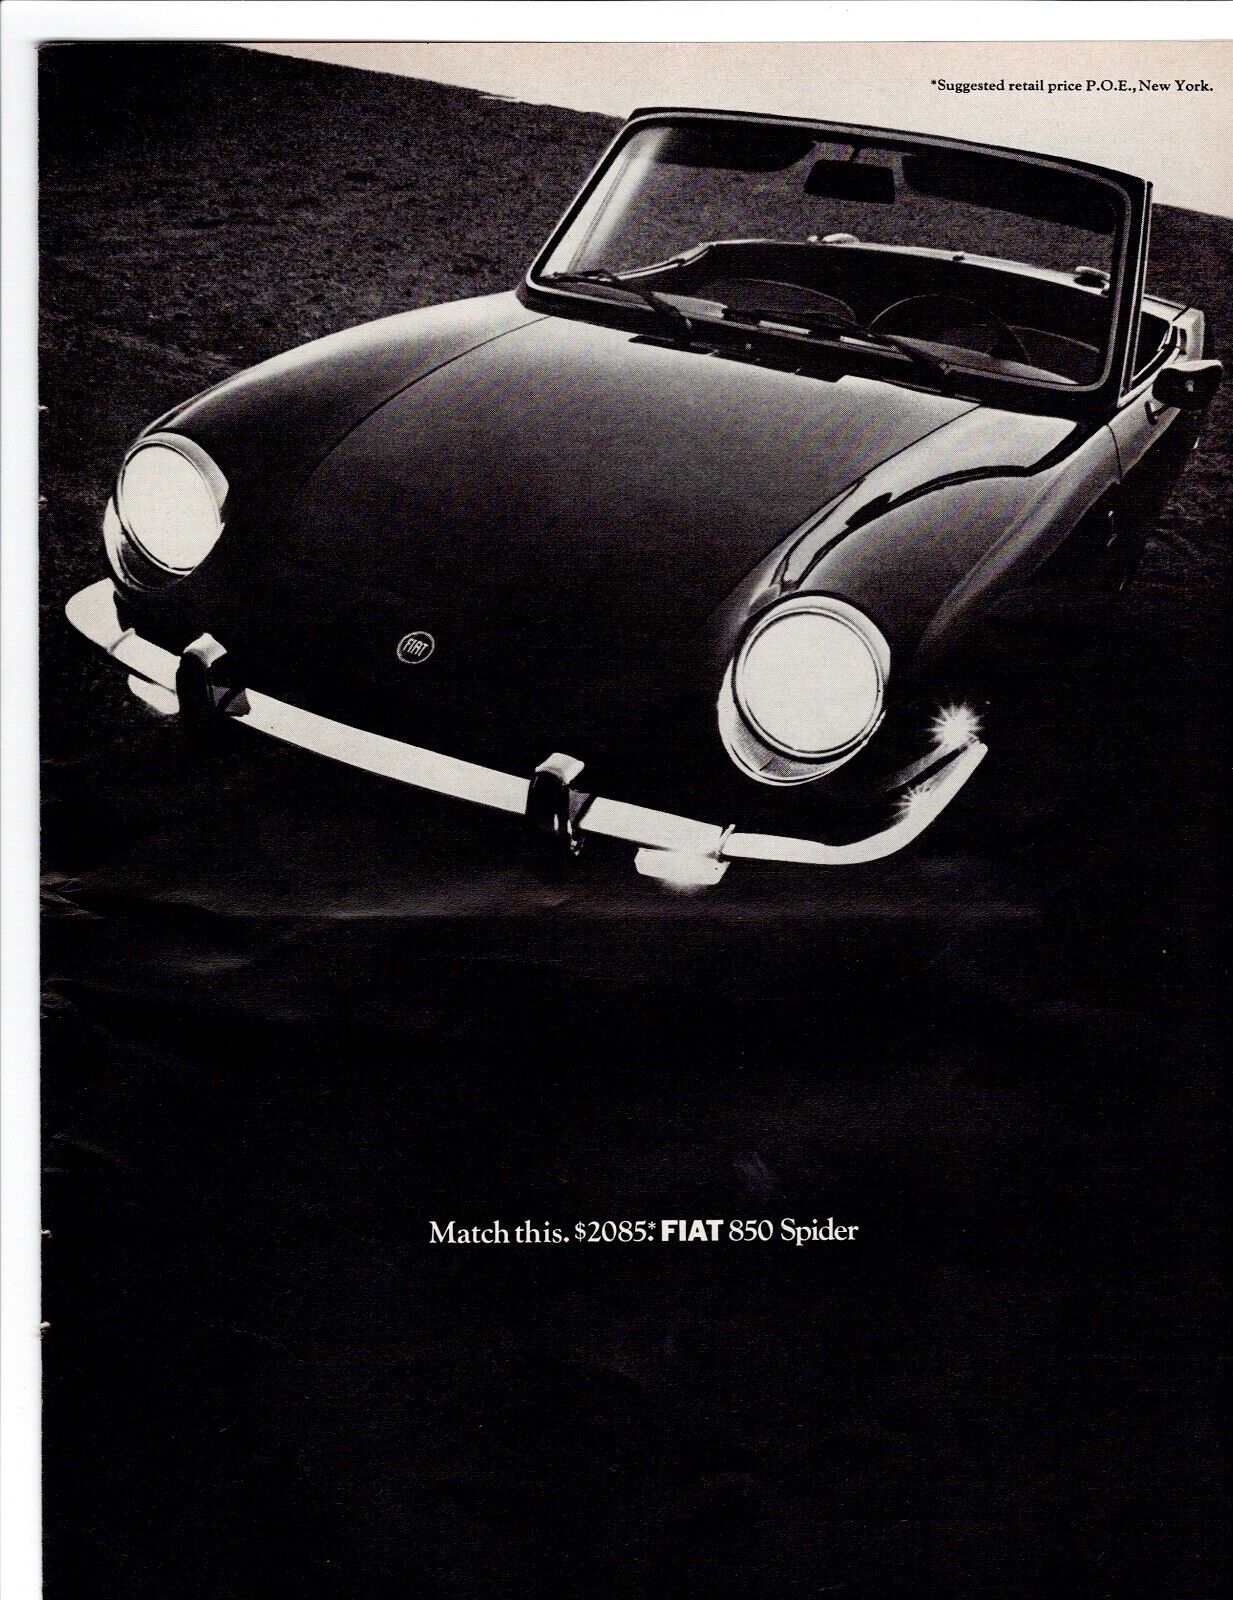 1968 FIAT 850 Spider Convertible Sports Car Ad ~ Match this: $2085